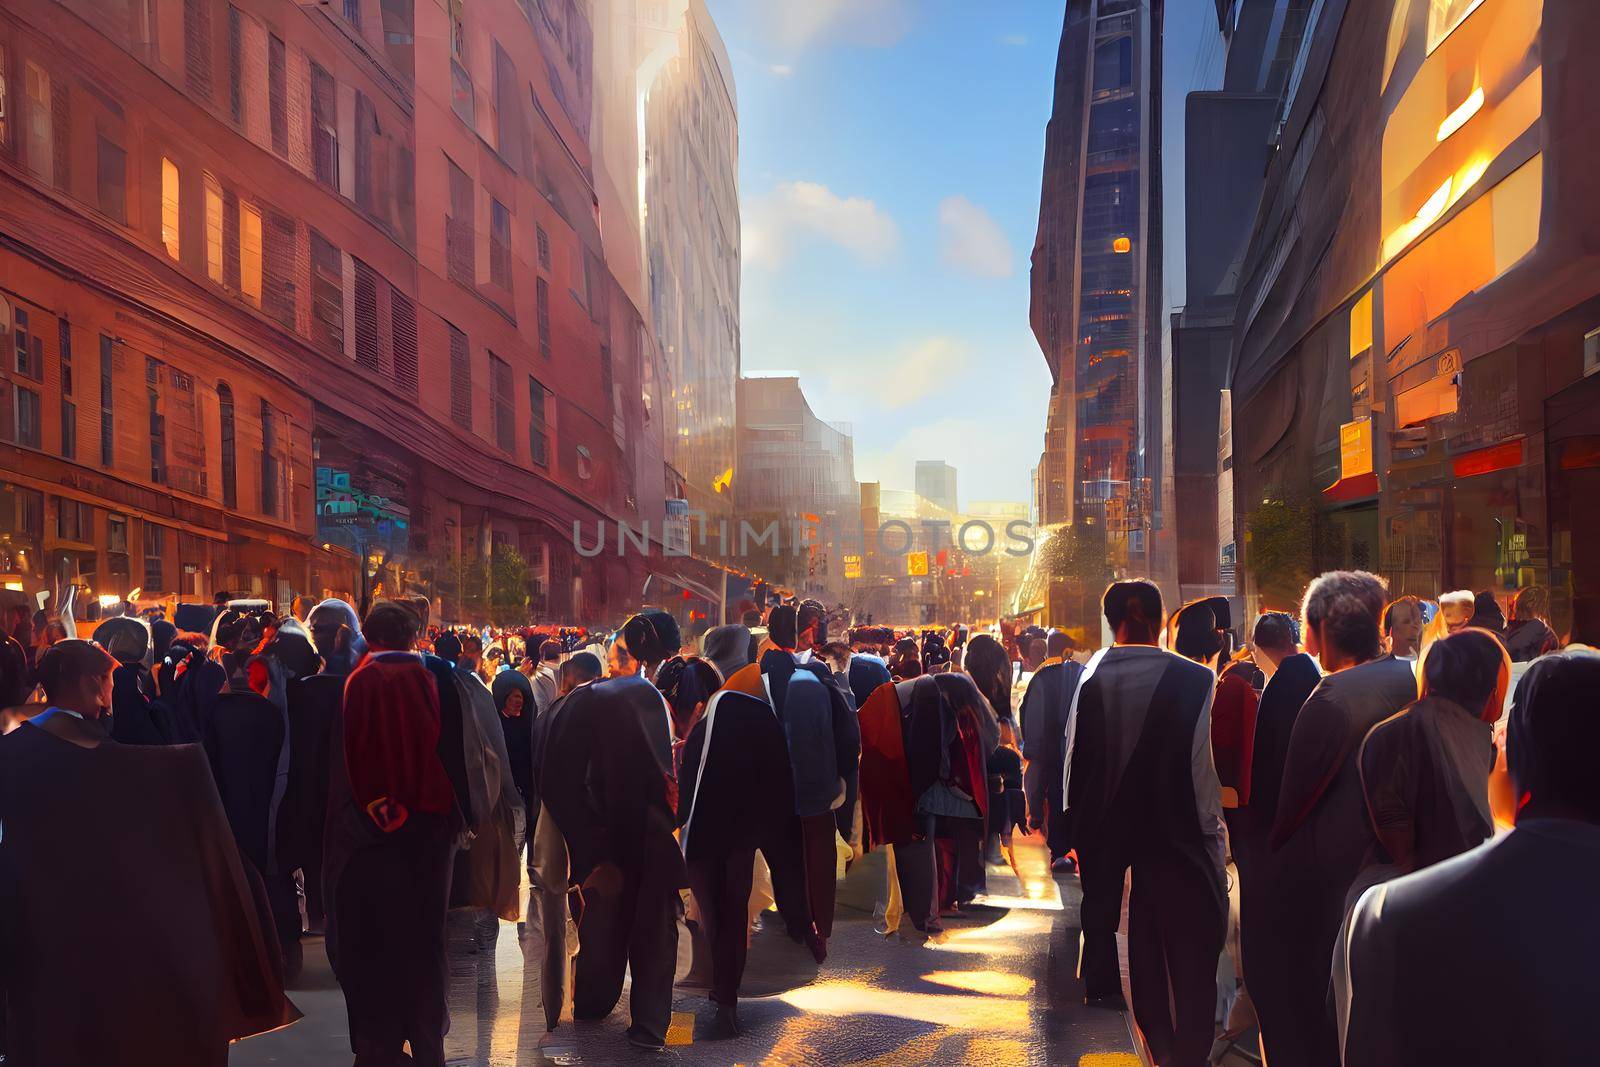 crowd of office suit wearing people walking to work at downtown street, neural network generated art. Digitally generated image. Not based on any actual scene or pattern.